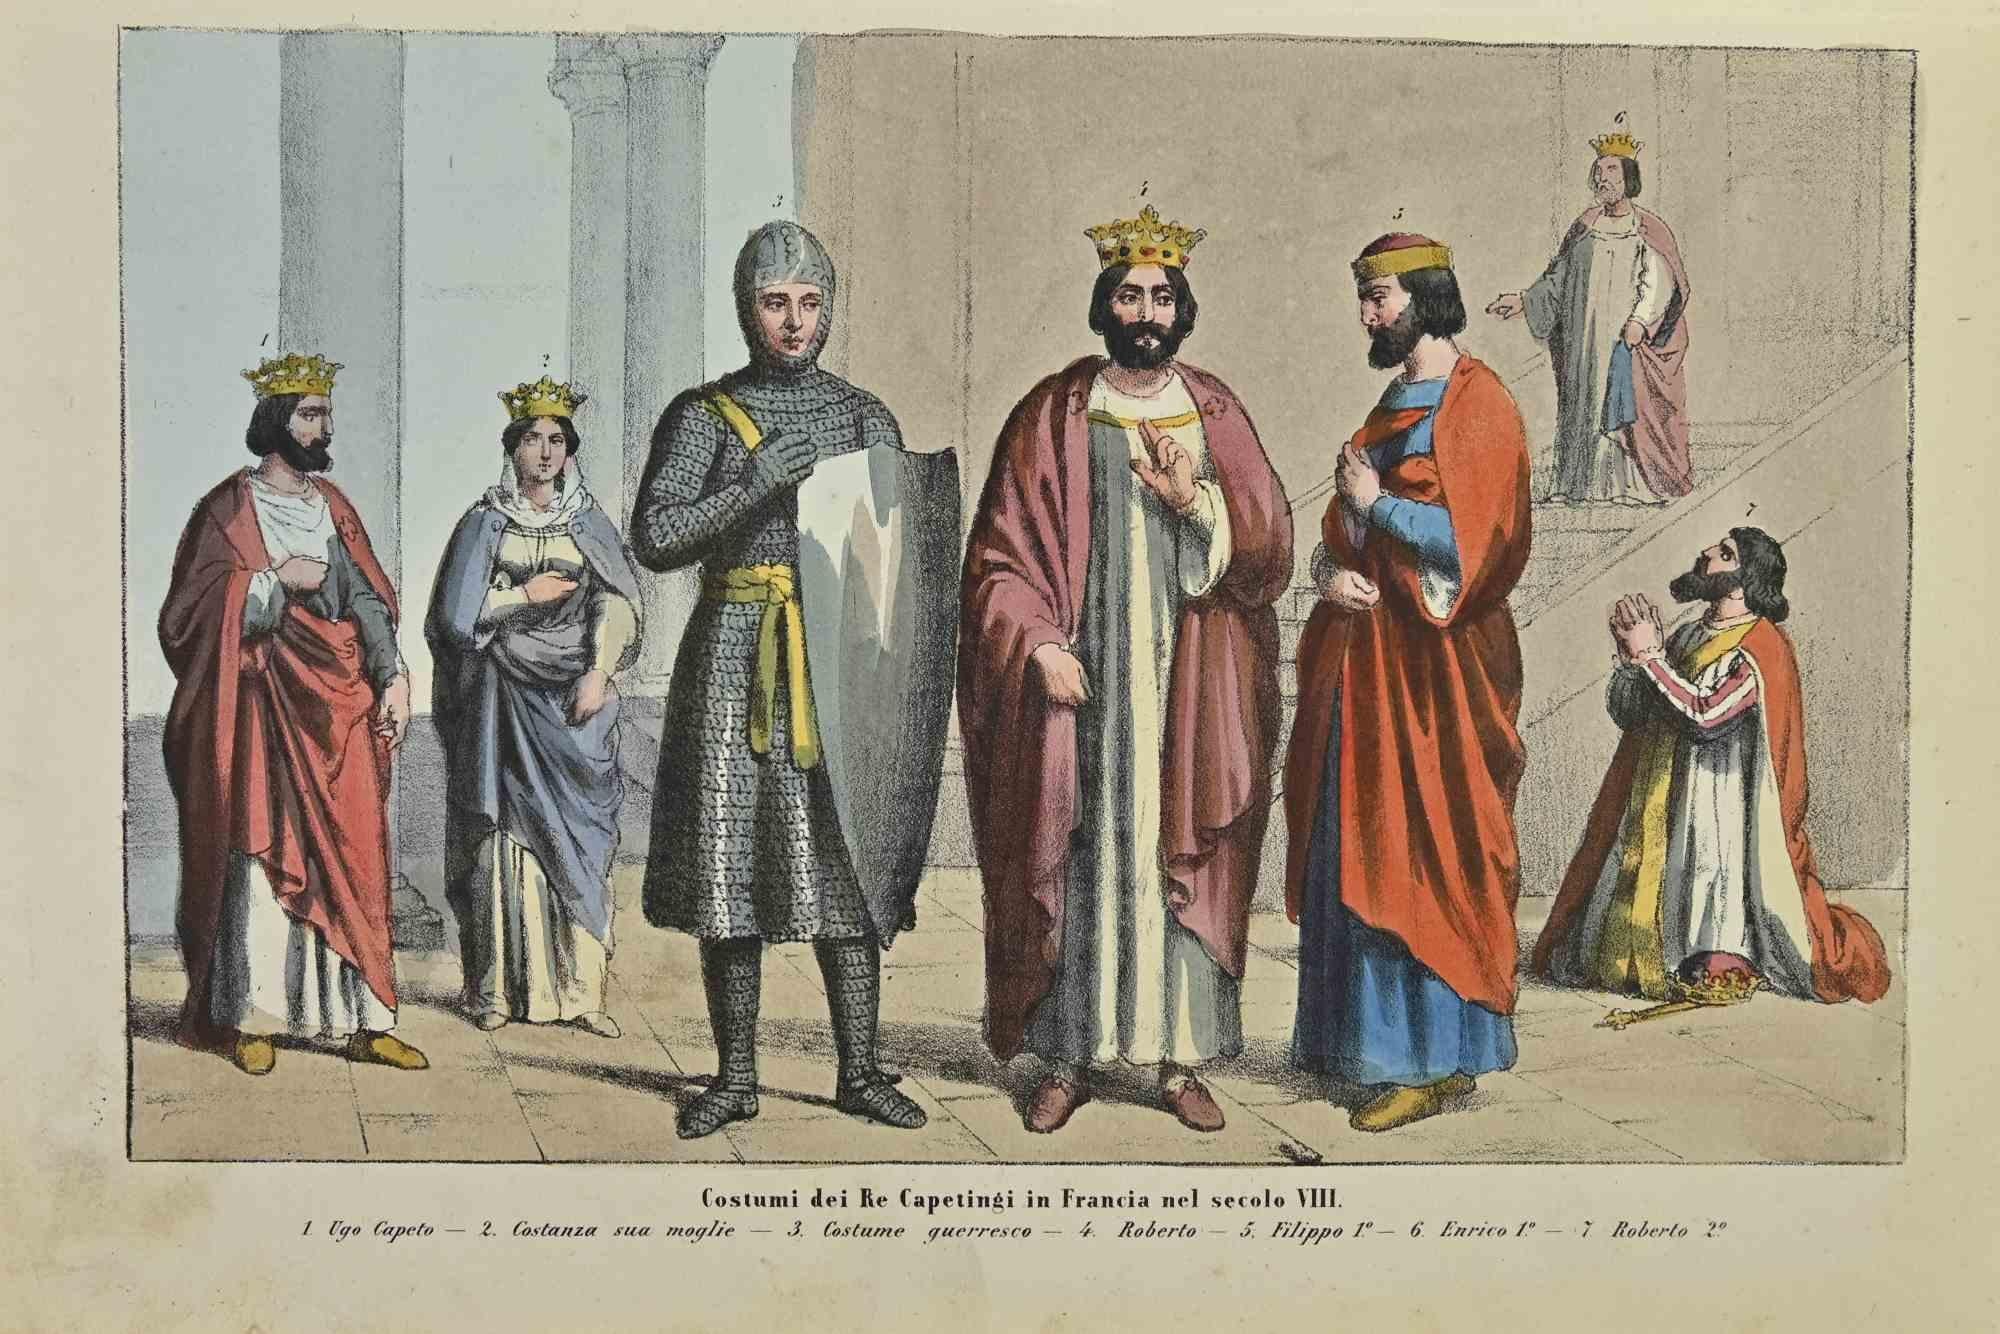 Costumes of the Capetian Kings in France in the 8th century is a lithograph made by Auguste Wahlen in 1844.

Hand colored.

Good condition.

At the center of the artwork is the original title "Costumi dei Re Capetingi in Francia nel secolo